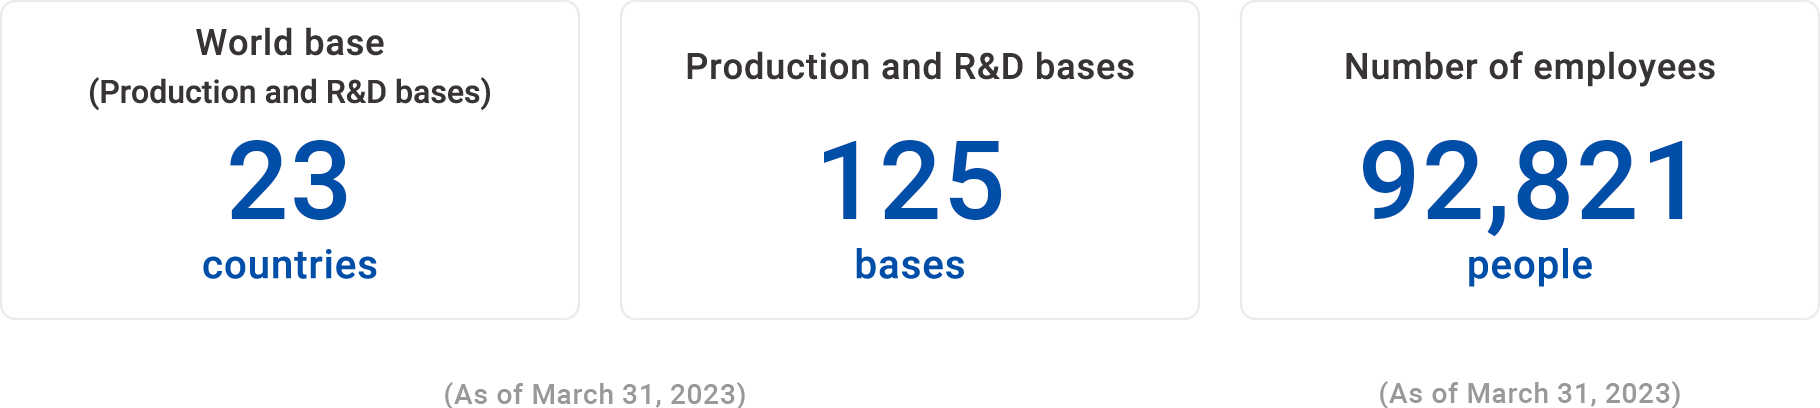 World base(Production and R&D bases) 23 countries, Production and R&D bases 125 bases, Number of employees 92,821 people